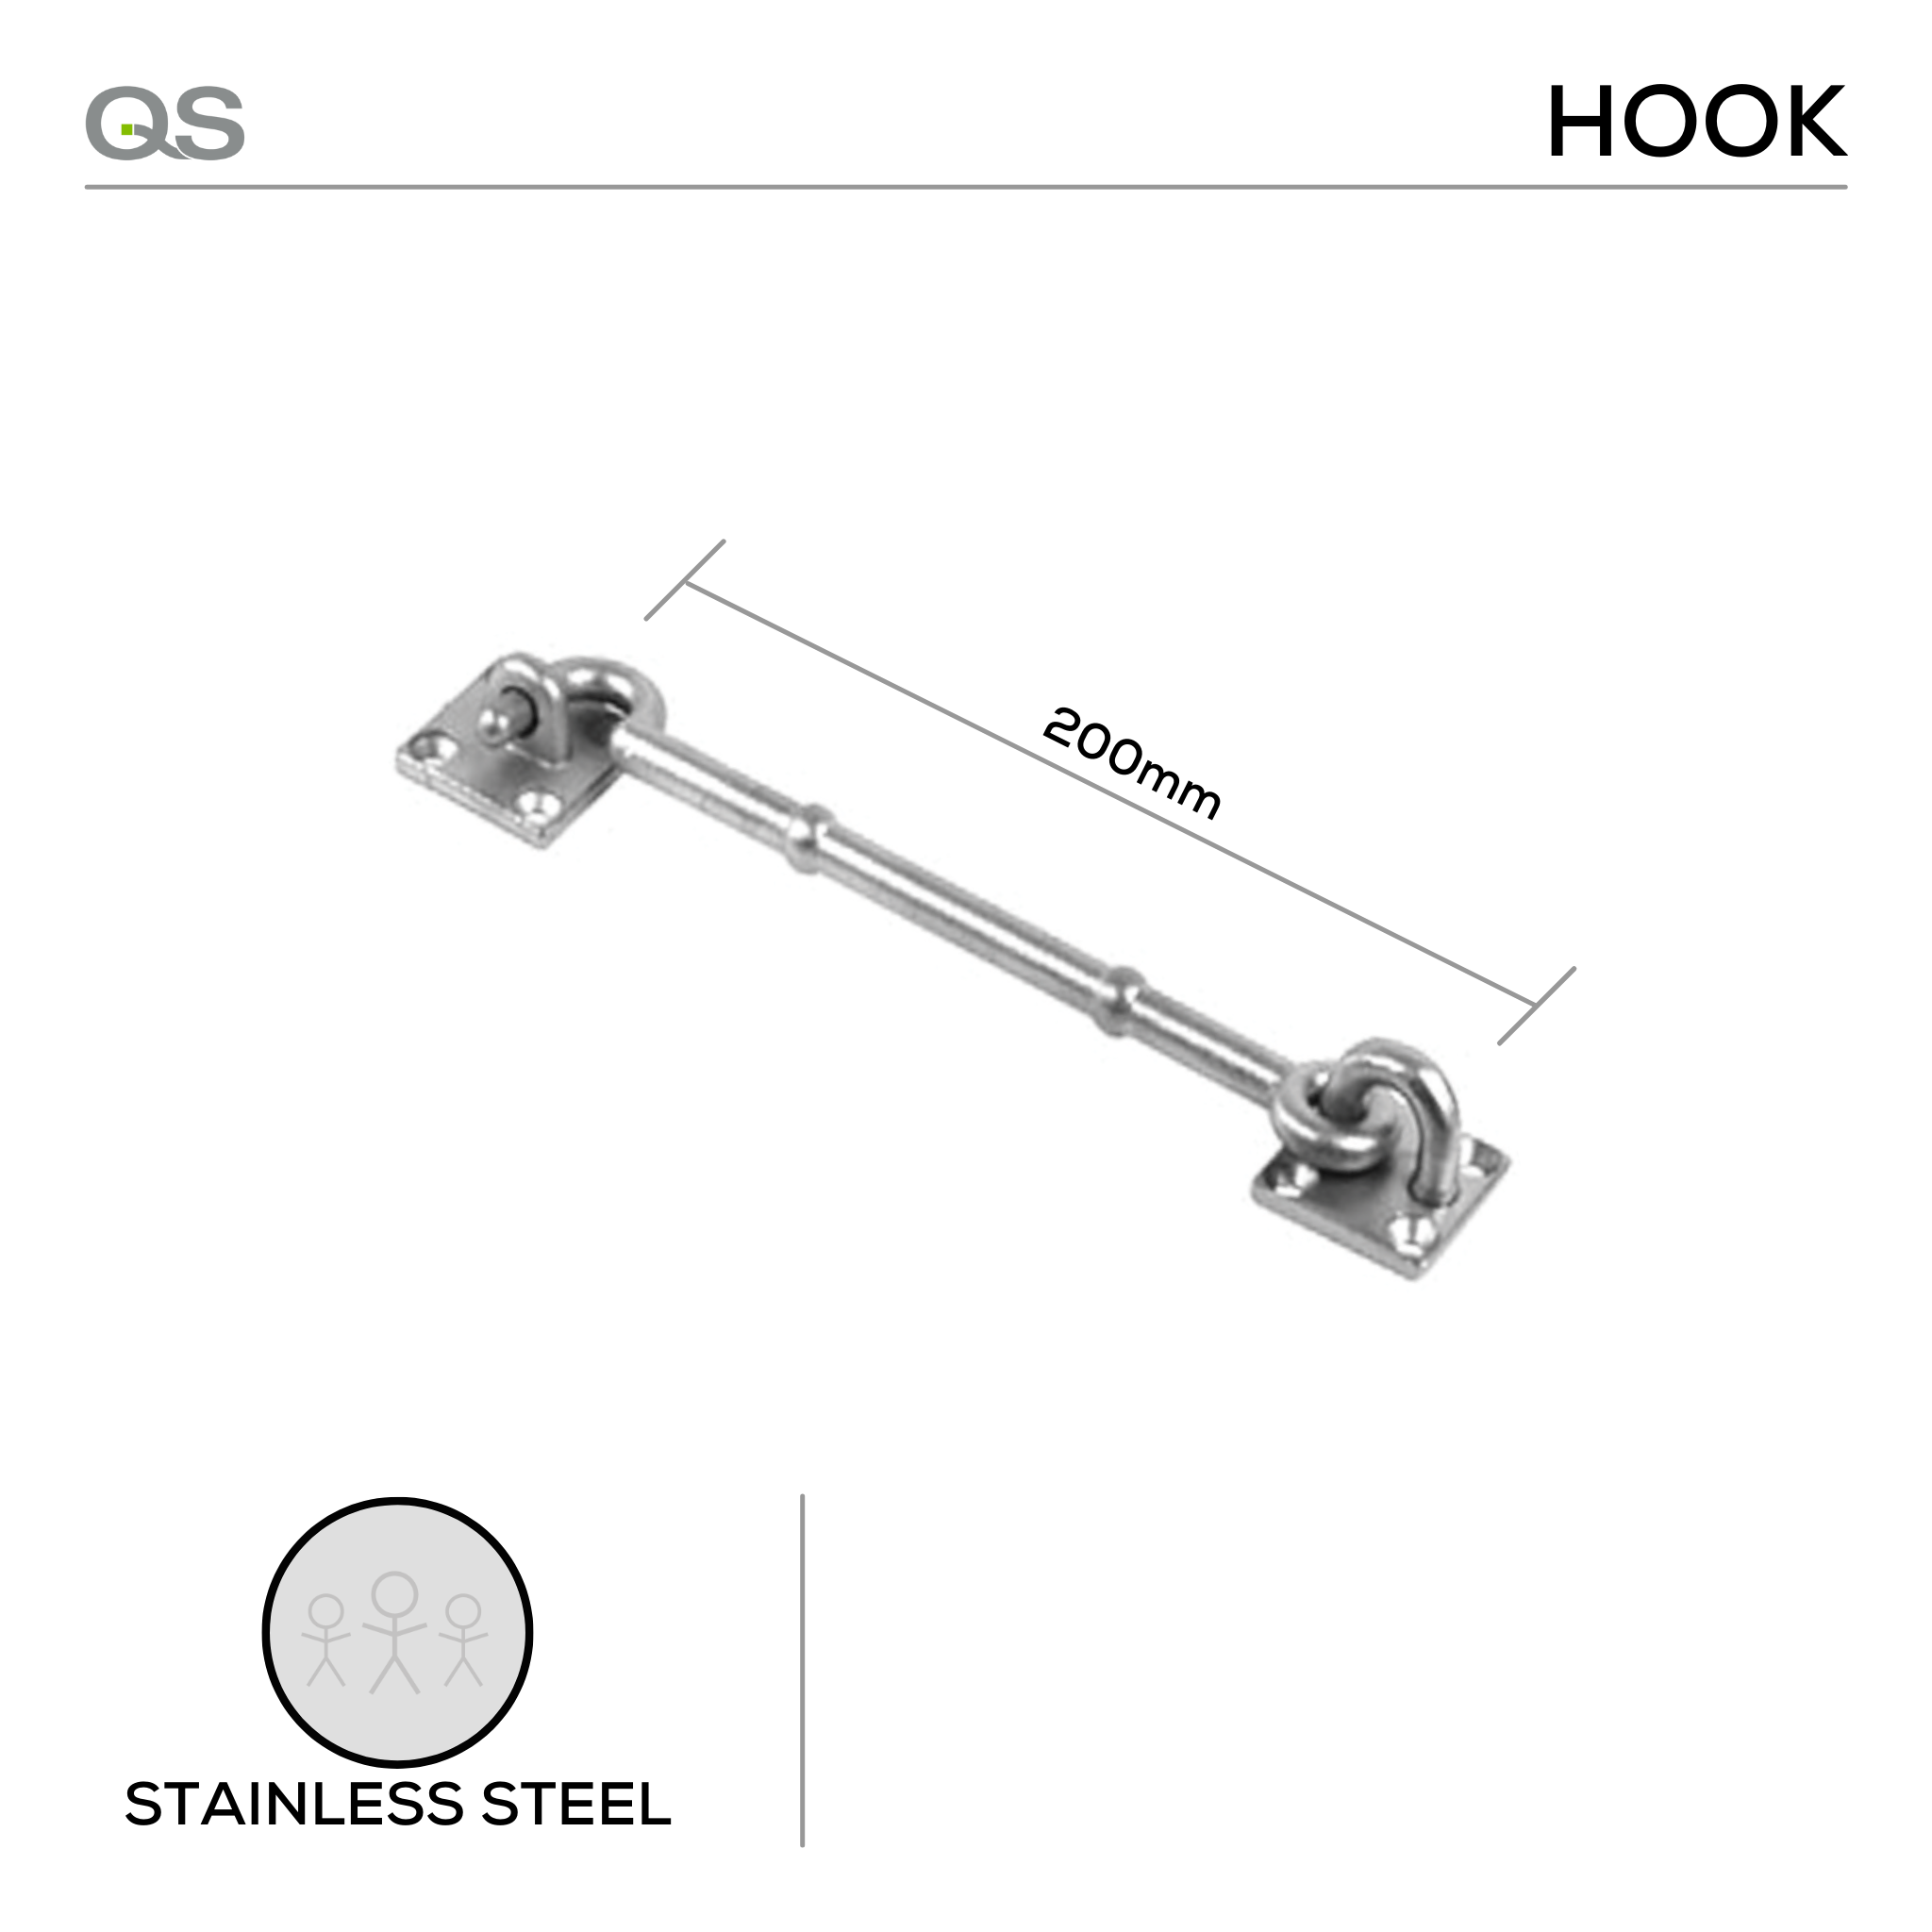 QS4449/4 200, Cabin Hook, 200mm (l), Stainless Steel, QS